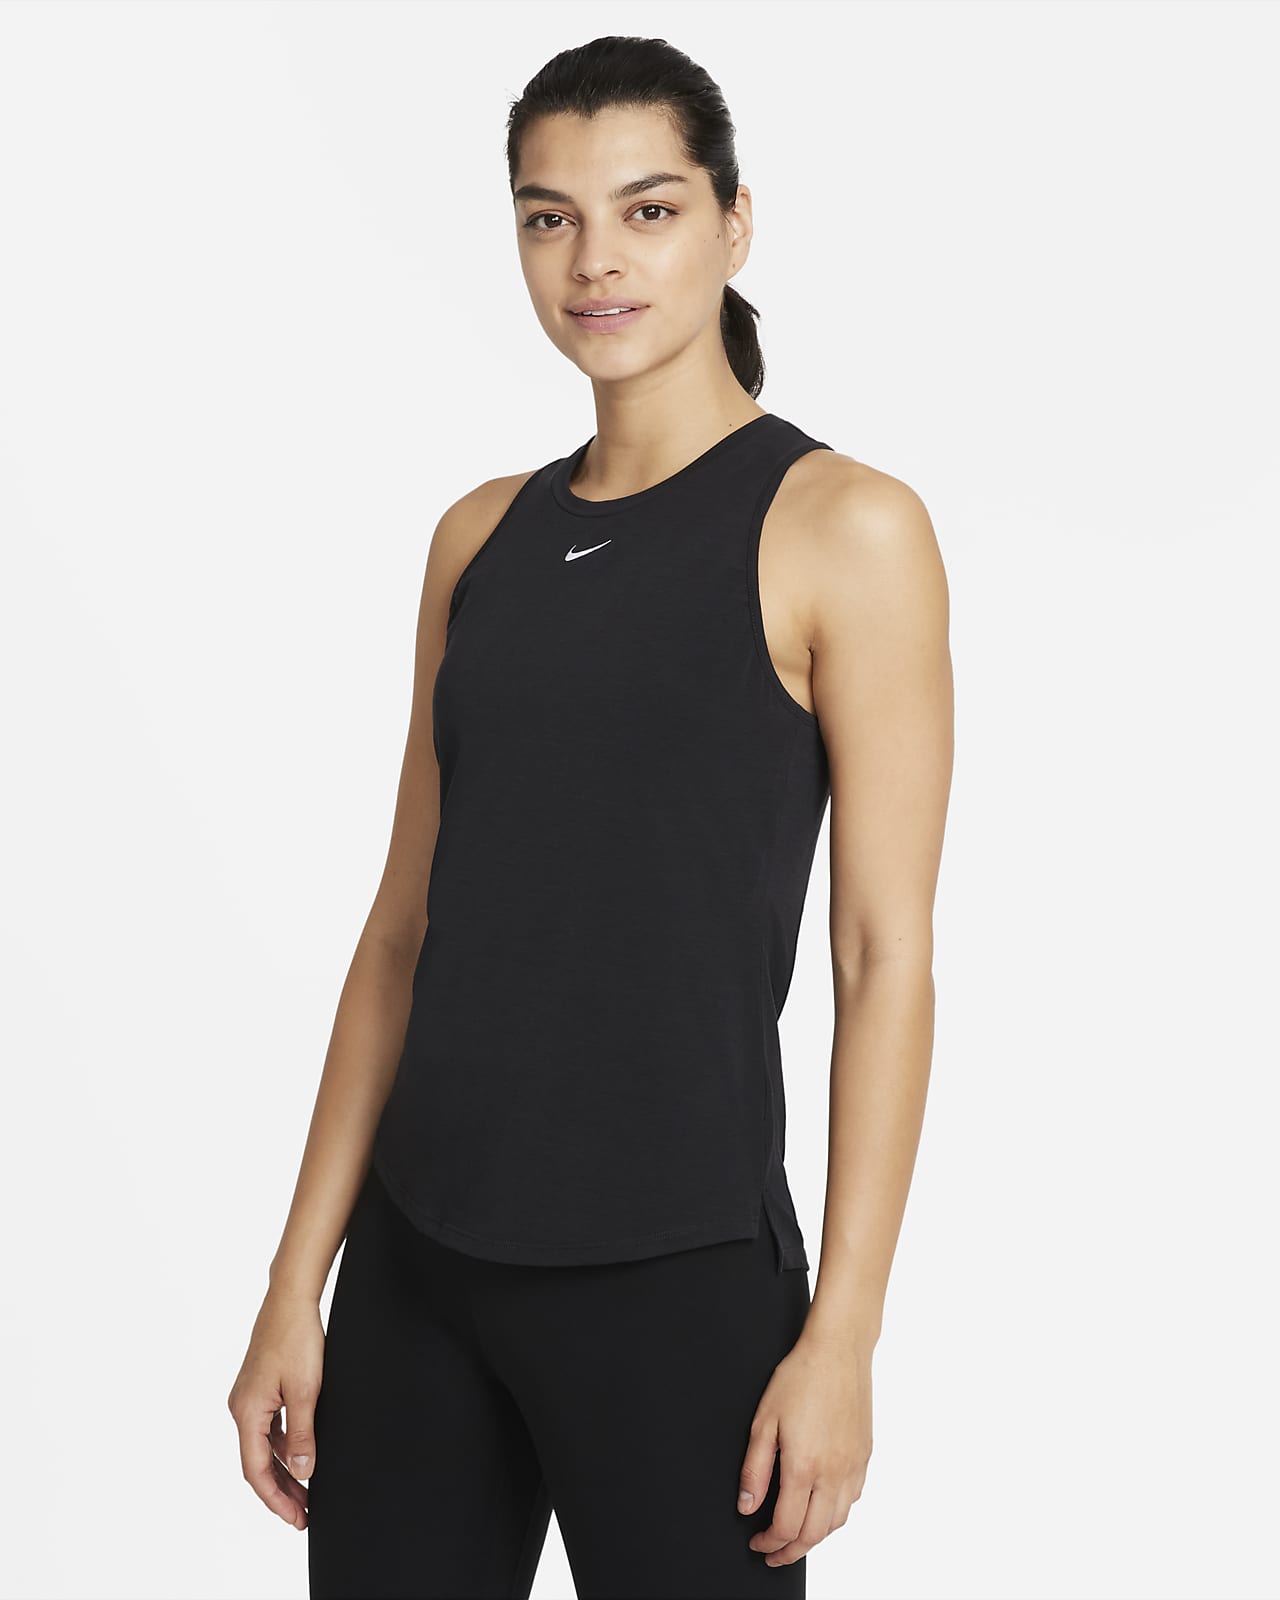 Nike Women's Dri-FIT SMALL One Luxe Slim Fit Tank Top DD0595-010 NWT